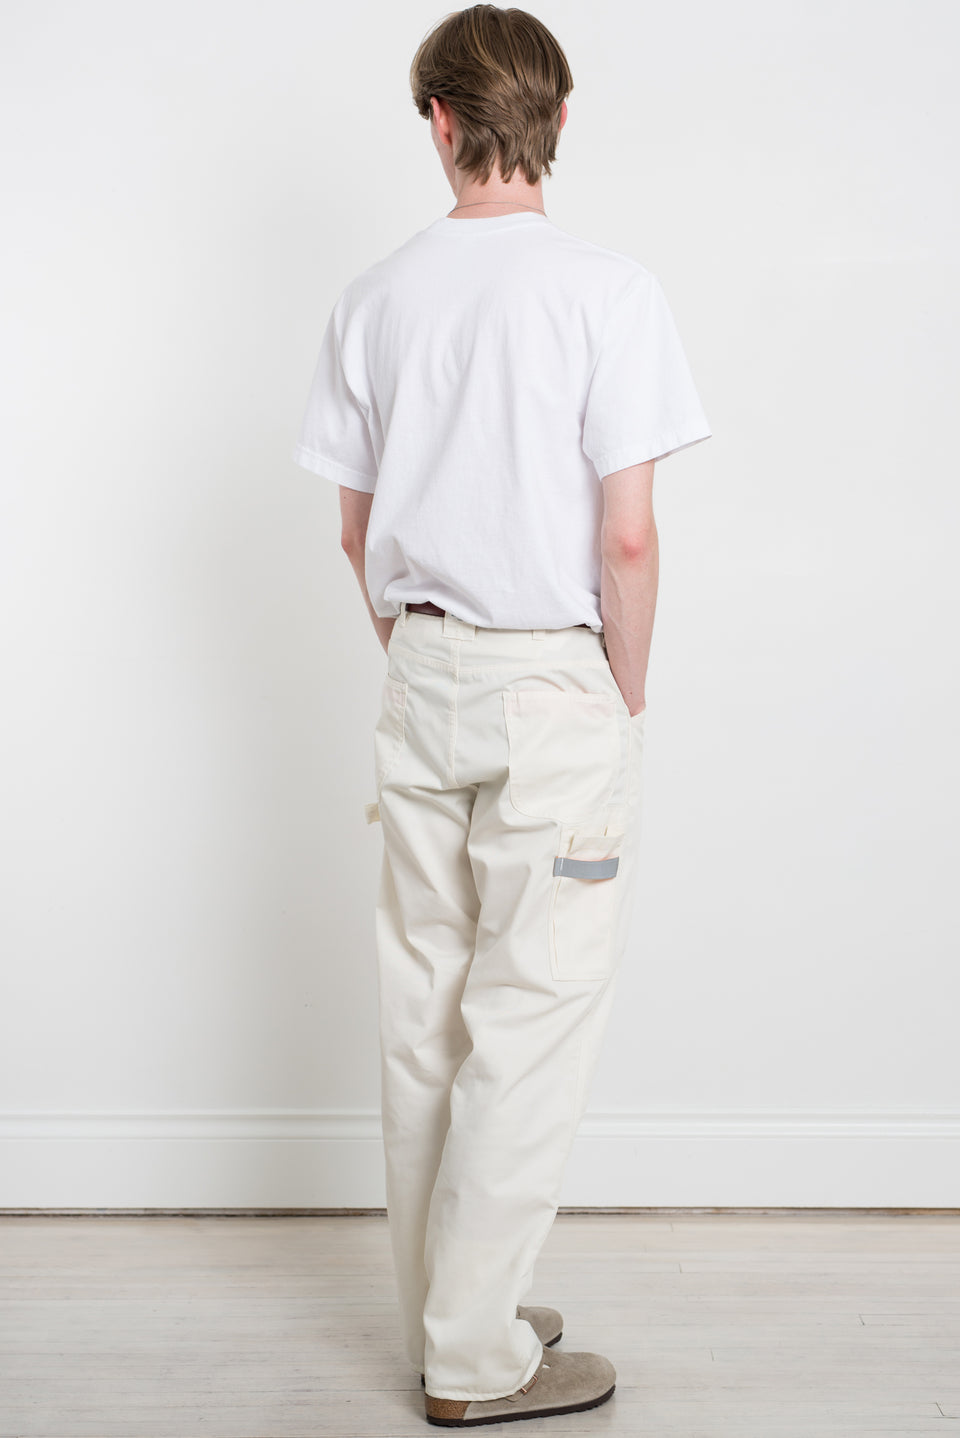 Sassafras SS23 Made in Japan SF-232015 Pruner Pants T/C Chino White Calculus Victoria BC Canada